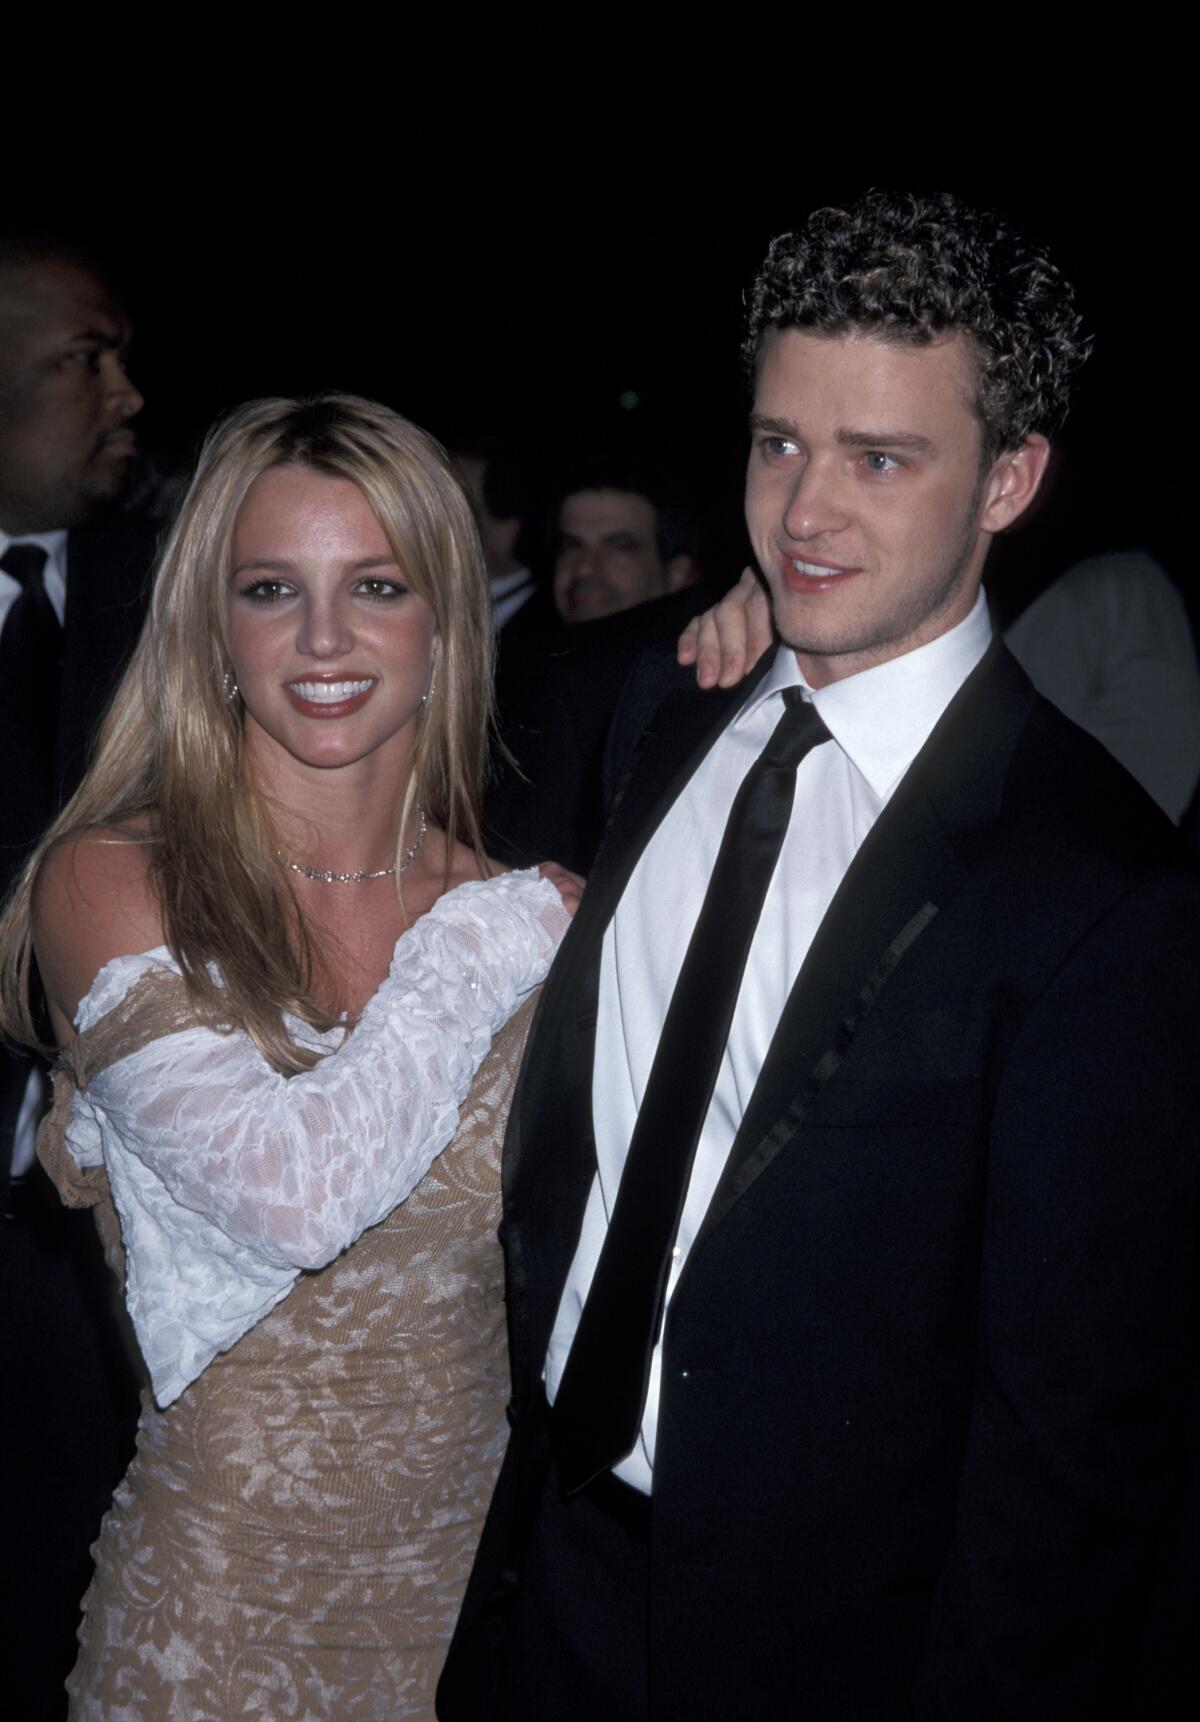 Britney Spears wearing a white and brown dress and Justin Timberlake wearing a suit